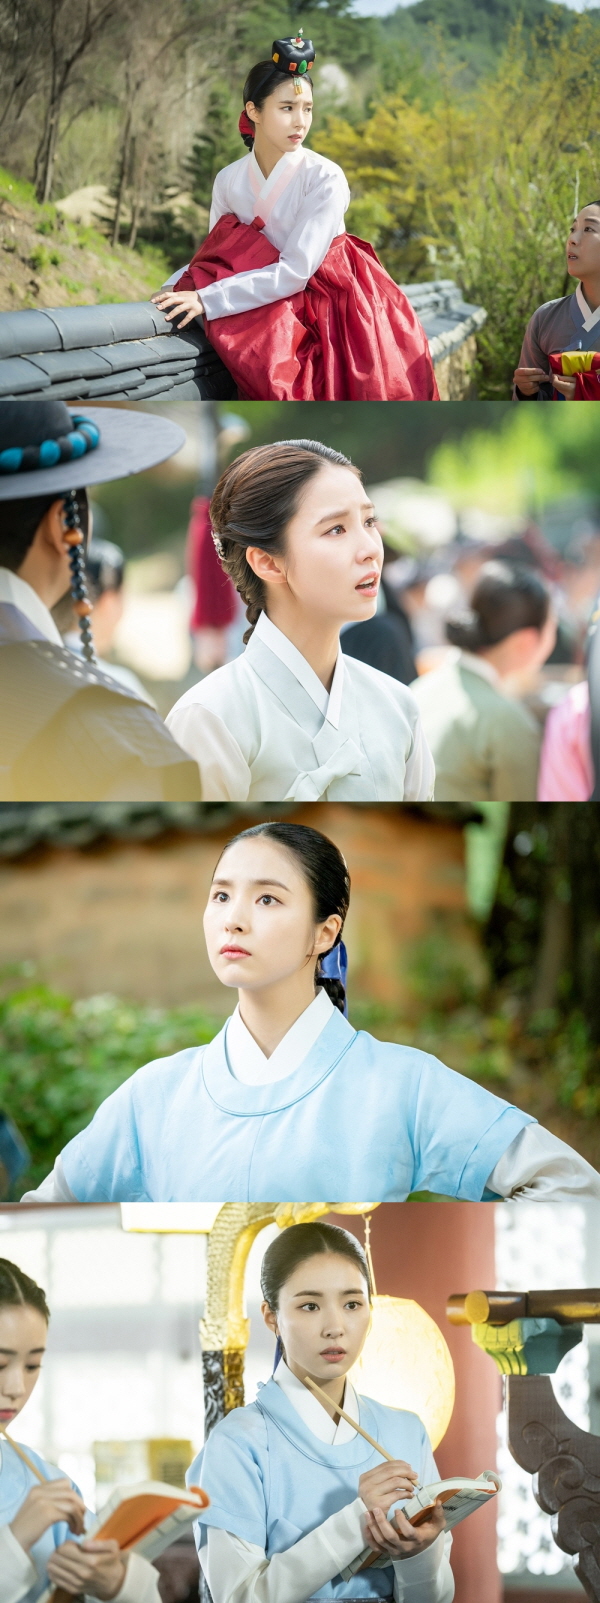 Na Hae-ryung, a new employee, was featured on a special broadcast Watching at once thanks to its popularity.The MBC drama Na Hae-ryung, which was first broadcast on the 17th, took the top spot as soon as it appeared in the house theater, and immediately became a throne of the drama.Na Hae-ryung is What if the female officer system was settled in Korea under Japan rule?Under the assumption that it is the first problematic drama of Joseon, the drama about the Phil full romance of Na Hae-ryung and the anti-war mother Solo Prince Lee Rim (Jung Eun-woo).Ada Lovelace, who was treated as a freak in the 19th century, plant a precious seed called change against the old truth that men and women are unusual and there is a good place in their identity.Shin Se-kyung, a historical drama goddess, and Jung Eun-woo, a next-generation star, are continuing to rise in ratings every time with a combination of Park Ki-woong, who has shined his presence through various works.I looked at the unique charm points of the drama ahead of the special broadcast Na Hae-ryung at once.# 1. The only person the king feared! The first drama of the officer () protagonist!Na Hae-ryung is the first drama to feature the Secret, who has been the surrounding figure of the historical drama so far.In many historical dramas, the officer was a person who just passed by or appeared to match the assortment.Na Hae-ryung has set such a priest on the front as the main character and has added a strange imagination of What if there was a female officer?The officer is an official in charge of writing the draft of history and participates in all places and events where the king meets his servant. He left discussions on affairs between the deputies and various reports on the first ().They are the super-elite management of the time, with the aspect of a historical scholar in that they evaluate the record management specialist through the history in that they manage the modern specified article in that they wrote all the reports in the first place and the records can be preserved without disappearing.The ultimate mission of the officer was to compile history, but it was also their important task to monitor and check the kingship by writing the same as they had seen before.So the king, who was the absolute power of Joseon, was the only person who was afraid.In particular, the officer was selected through a process as difficult as the queens house process with the special meaning of management that the high-ranking officials were also jealous because of the importance and pride of recording history.Of course, it was not allowed for women. But the new officer, Na Hae-ryung, presents the female officer here.However, drama is based on actual historical facts.According to the Chosun Dynasty Annals, on April 22, 14, the Dongjisa Kim An-guk proposed to introduce the Ada Lovelace system to the middle class, citing the case that there was Ada Lovelace in China and recorded the trends of emperors and concubines.Director Kang Il-soo said, I thought it would be fun if the Ada Lovelace system was implemented in Joseon.In particular, the 19th century was the time when Joseon entered the darkness of 100 years. At this time, I thought that if the young people changed their eyes to the outside world, interested in Western technical civilization, and actively lived their lives, Joseon would have made a better history.I thought the beginning of the change might be Ada Lovelace #2. Fascinated by the unrelenting GLOW in the Korean under Japan rule, Na Hae-ryungIt must be stern: the king, the taxa, the deputies, the unafraid, the stubborn, the bully, the guts the odd GLOW.It is a sentence that expresses the main character Na Hae-ryung, who is divided by Shin Se-kyung.The 19th century Joseon, which became the background of the drama, was a country of Confucianism where men and women were distinguished and the distinction of status was severe.At that time, the past was a special opportunity that was only open to men, especially the vested interests represented by the yangban.Regardless of their status, GLOW married at a certain age and devoted their entire lives to raising their husbands and children.The female characters of the historical drama that have been introduced to the house theater have not been much out of this category.But the old Na Hae-ryung in the drama is quite different: Galileo Galilei, the master of the house, but the hobbies of the book, who admires the reading of the Western Orangka books.I spent my childhood in the Qing Dynasty, and it is a curious free soul in the world. When I see a difficult person, I am an Ojiraper who helps me back and forth.Here, it is independent enough to kick the marriage place prepared in the house and go to the ceremony with the past.It is no exaggeration to say that he has taken off the character of modern water and moved it to Joseon, so he can boldly say his beliefs in front of the crown prince.But this is the biggest attraction of the drama Na Hae-ryung.Na Hae-ryung, who seems to be out of place with the Korean under Japan rule, who refuses fate and rushes to get what he wants, gives excitement to viewers who live now and sympathizes.The old Na Hae-ryung of the nineteenth century is in contact with the present of the twenty-first century.Shin Se-kyung, who plays the role of Na Hae-ryung, also said, I tried to get away from the stereotypes I had learned in the historical dramas and historical time before to express Na Hae-ryung properly. I would like to ask for your interest and support for the appearance of Na Hae-ryung, who leads life independently with his choice and will, He said.The unique material called The Officer and the differentiated character Korea under Japan rule new woman are causing a fresh wind in the house theater. The more the time, the more the relationship between the narrative and the person becomes clearer, and the more the audience rating is expected to continue.Na Hae-ryung Special Broadcasting will be broadcast from 8:55 pm to 8 pm on the 30th.Photo = Green Snake Media